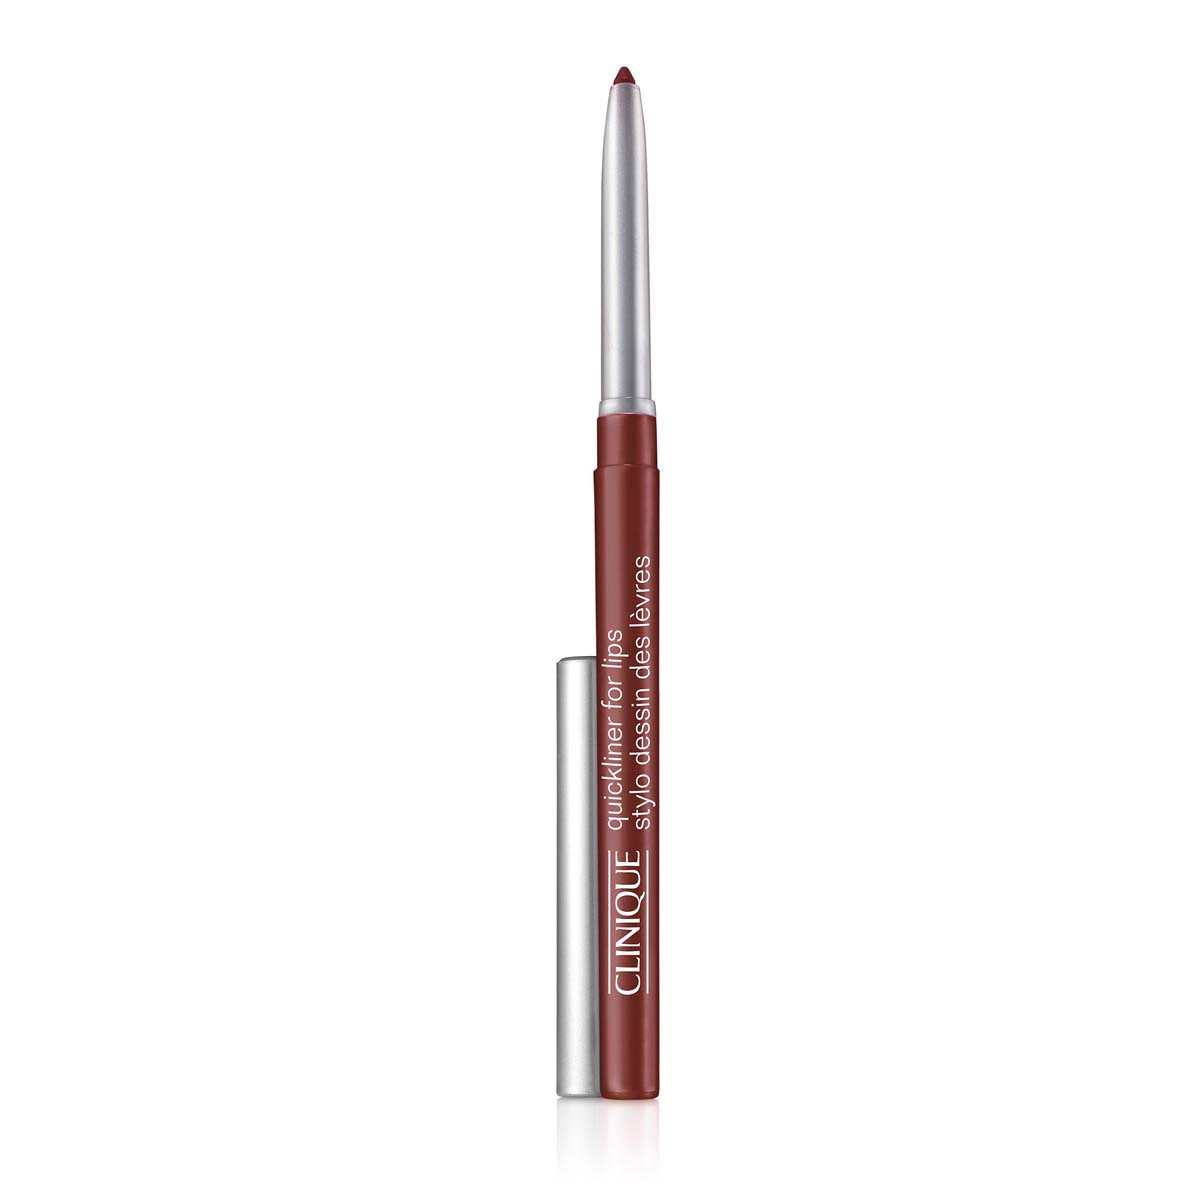 Clinique quicklinerTM for lips - 48 bing cherry, 48 BING CHERRY, large image number 0